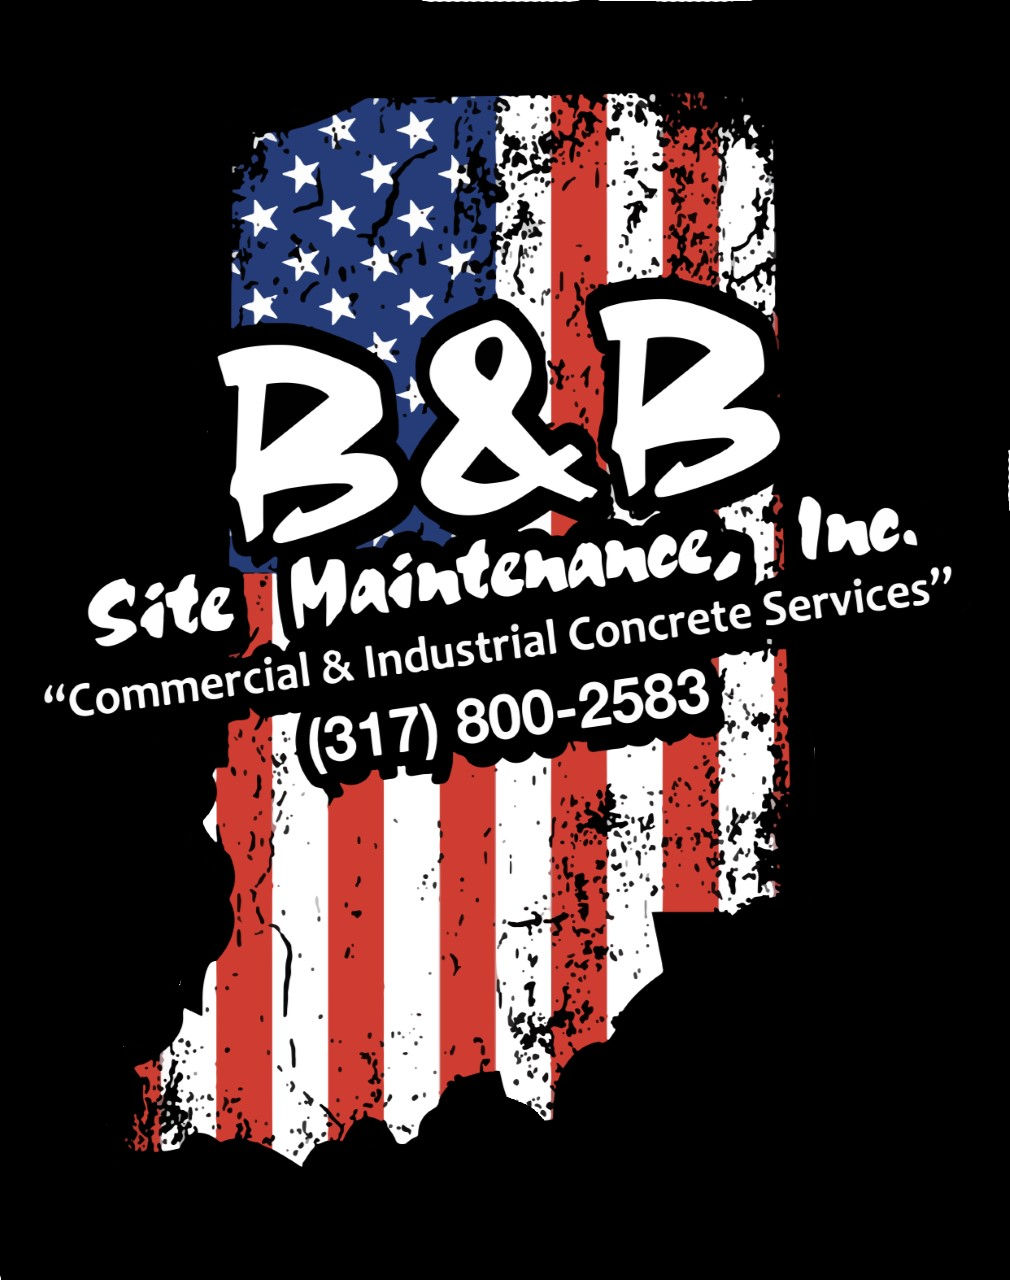 B and B Site Maintenance, Inc. Commercial and Industrial Concrete Services. 317 800-2583